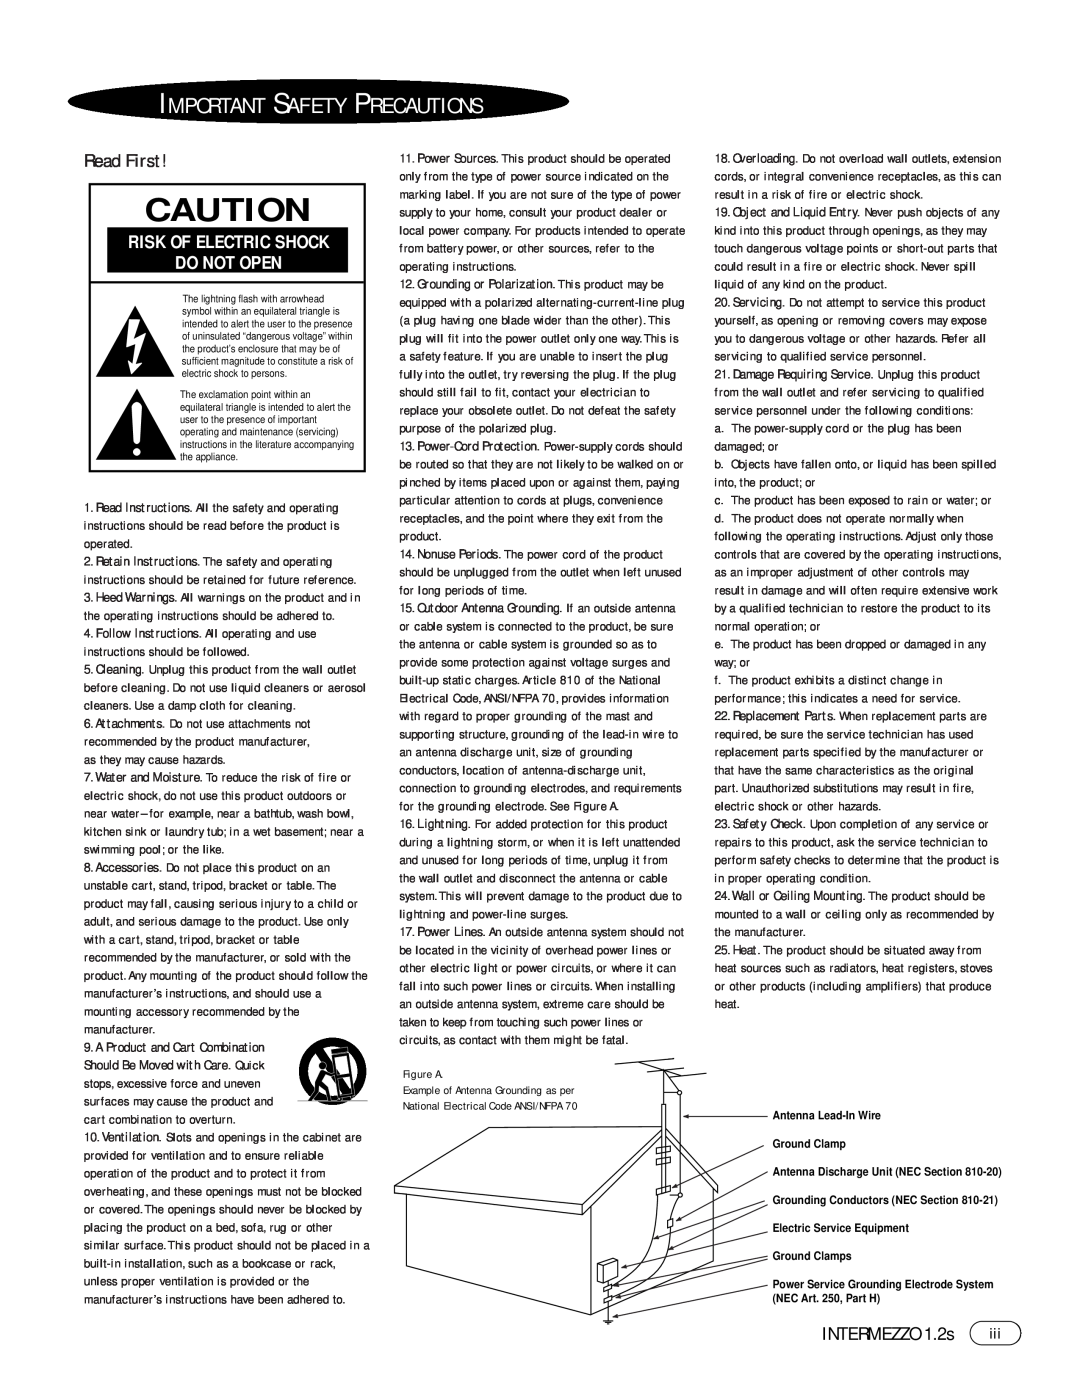 Infinity manual Important Safety Precautions, Read First, INTERMEZZO 1.2s, Do Not Open, Risk Of Electric Shock 